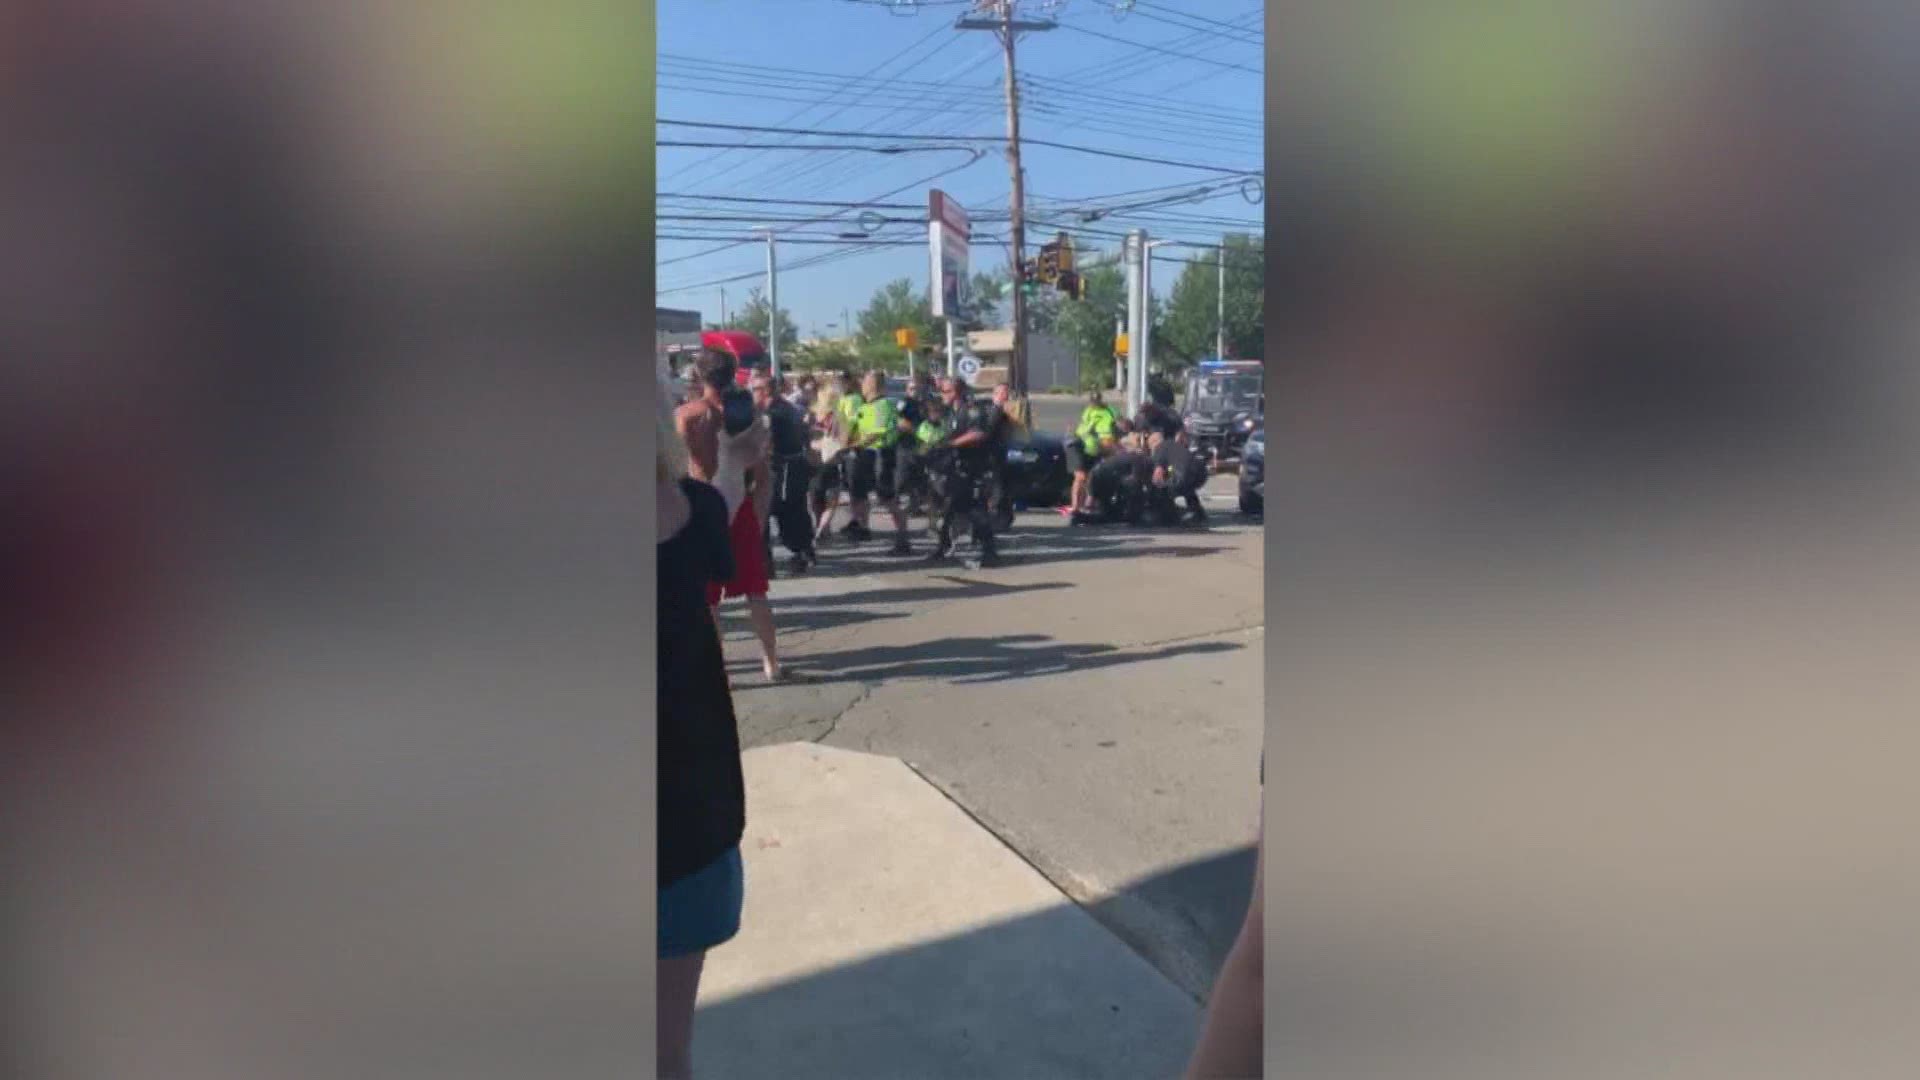 Three people were arrested Sunday after protestors were met with police and dogs after a woman drove through people marching in the street.